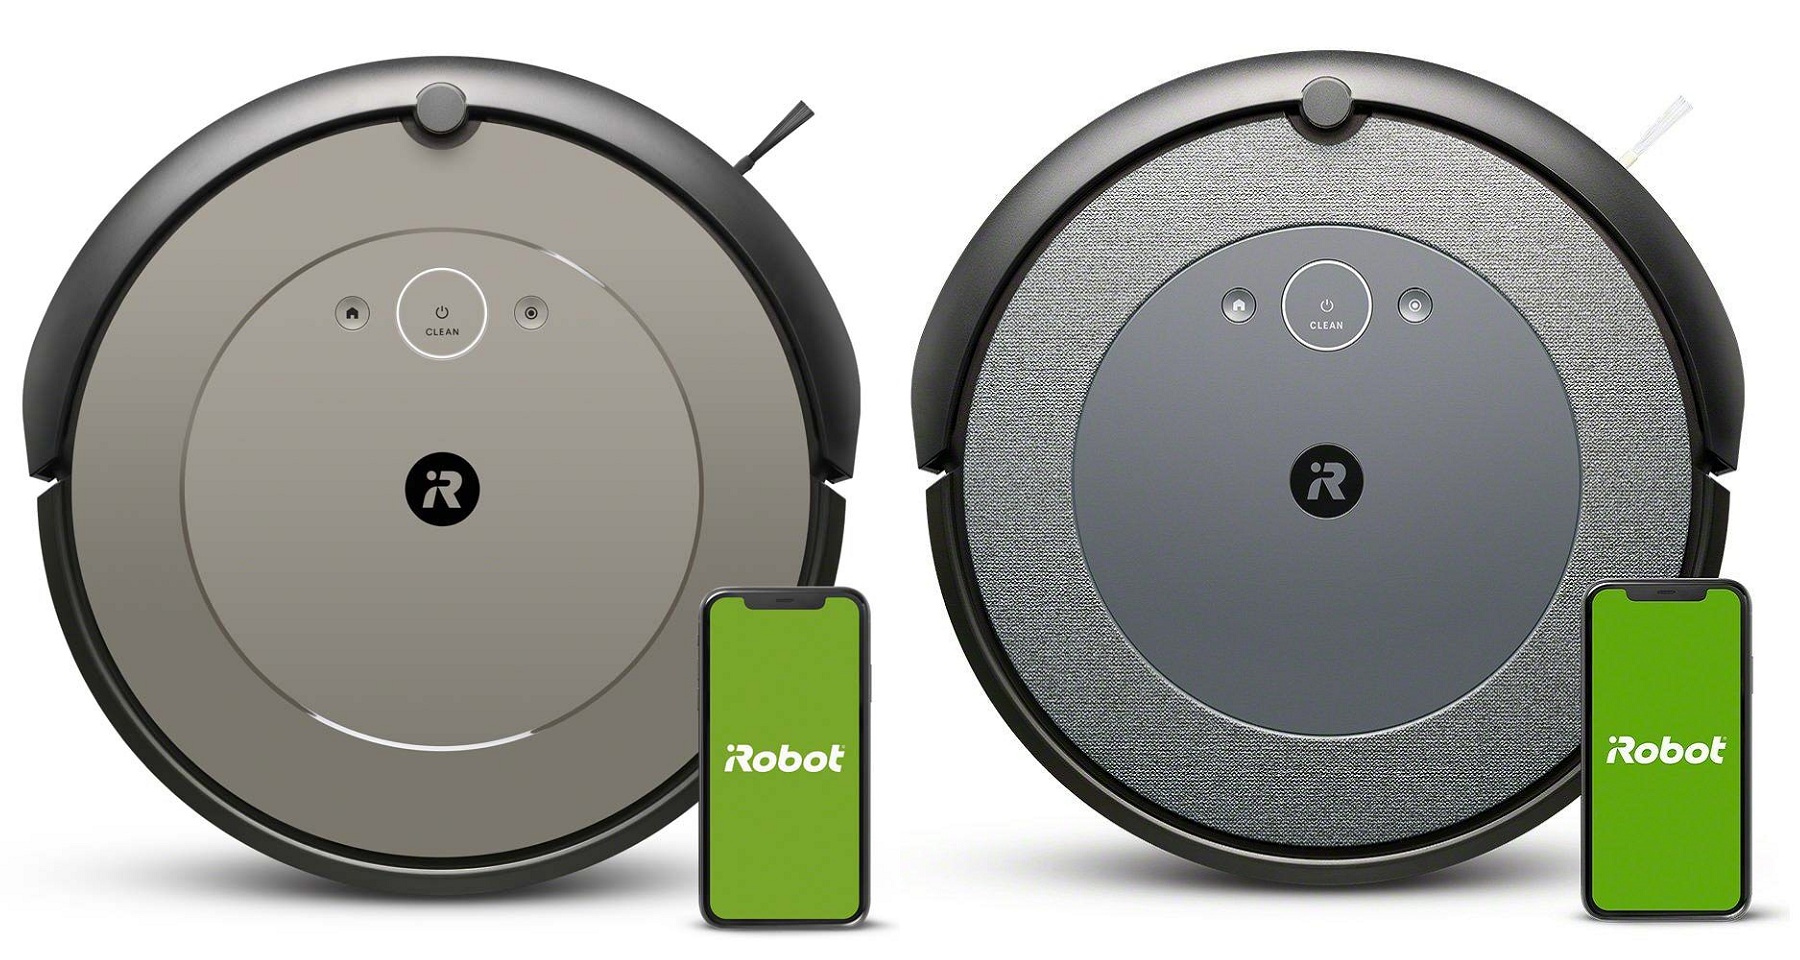 Roomba i1 vs i3 – Is There Even a Difference?